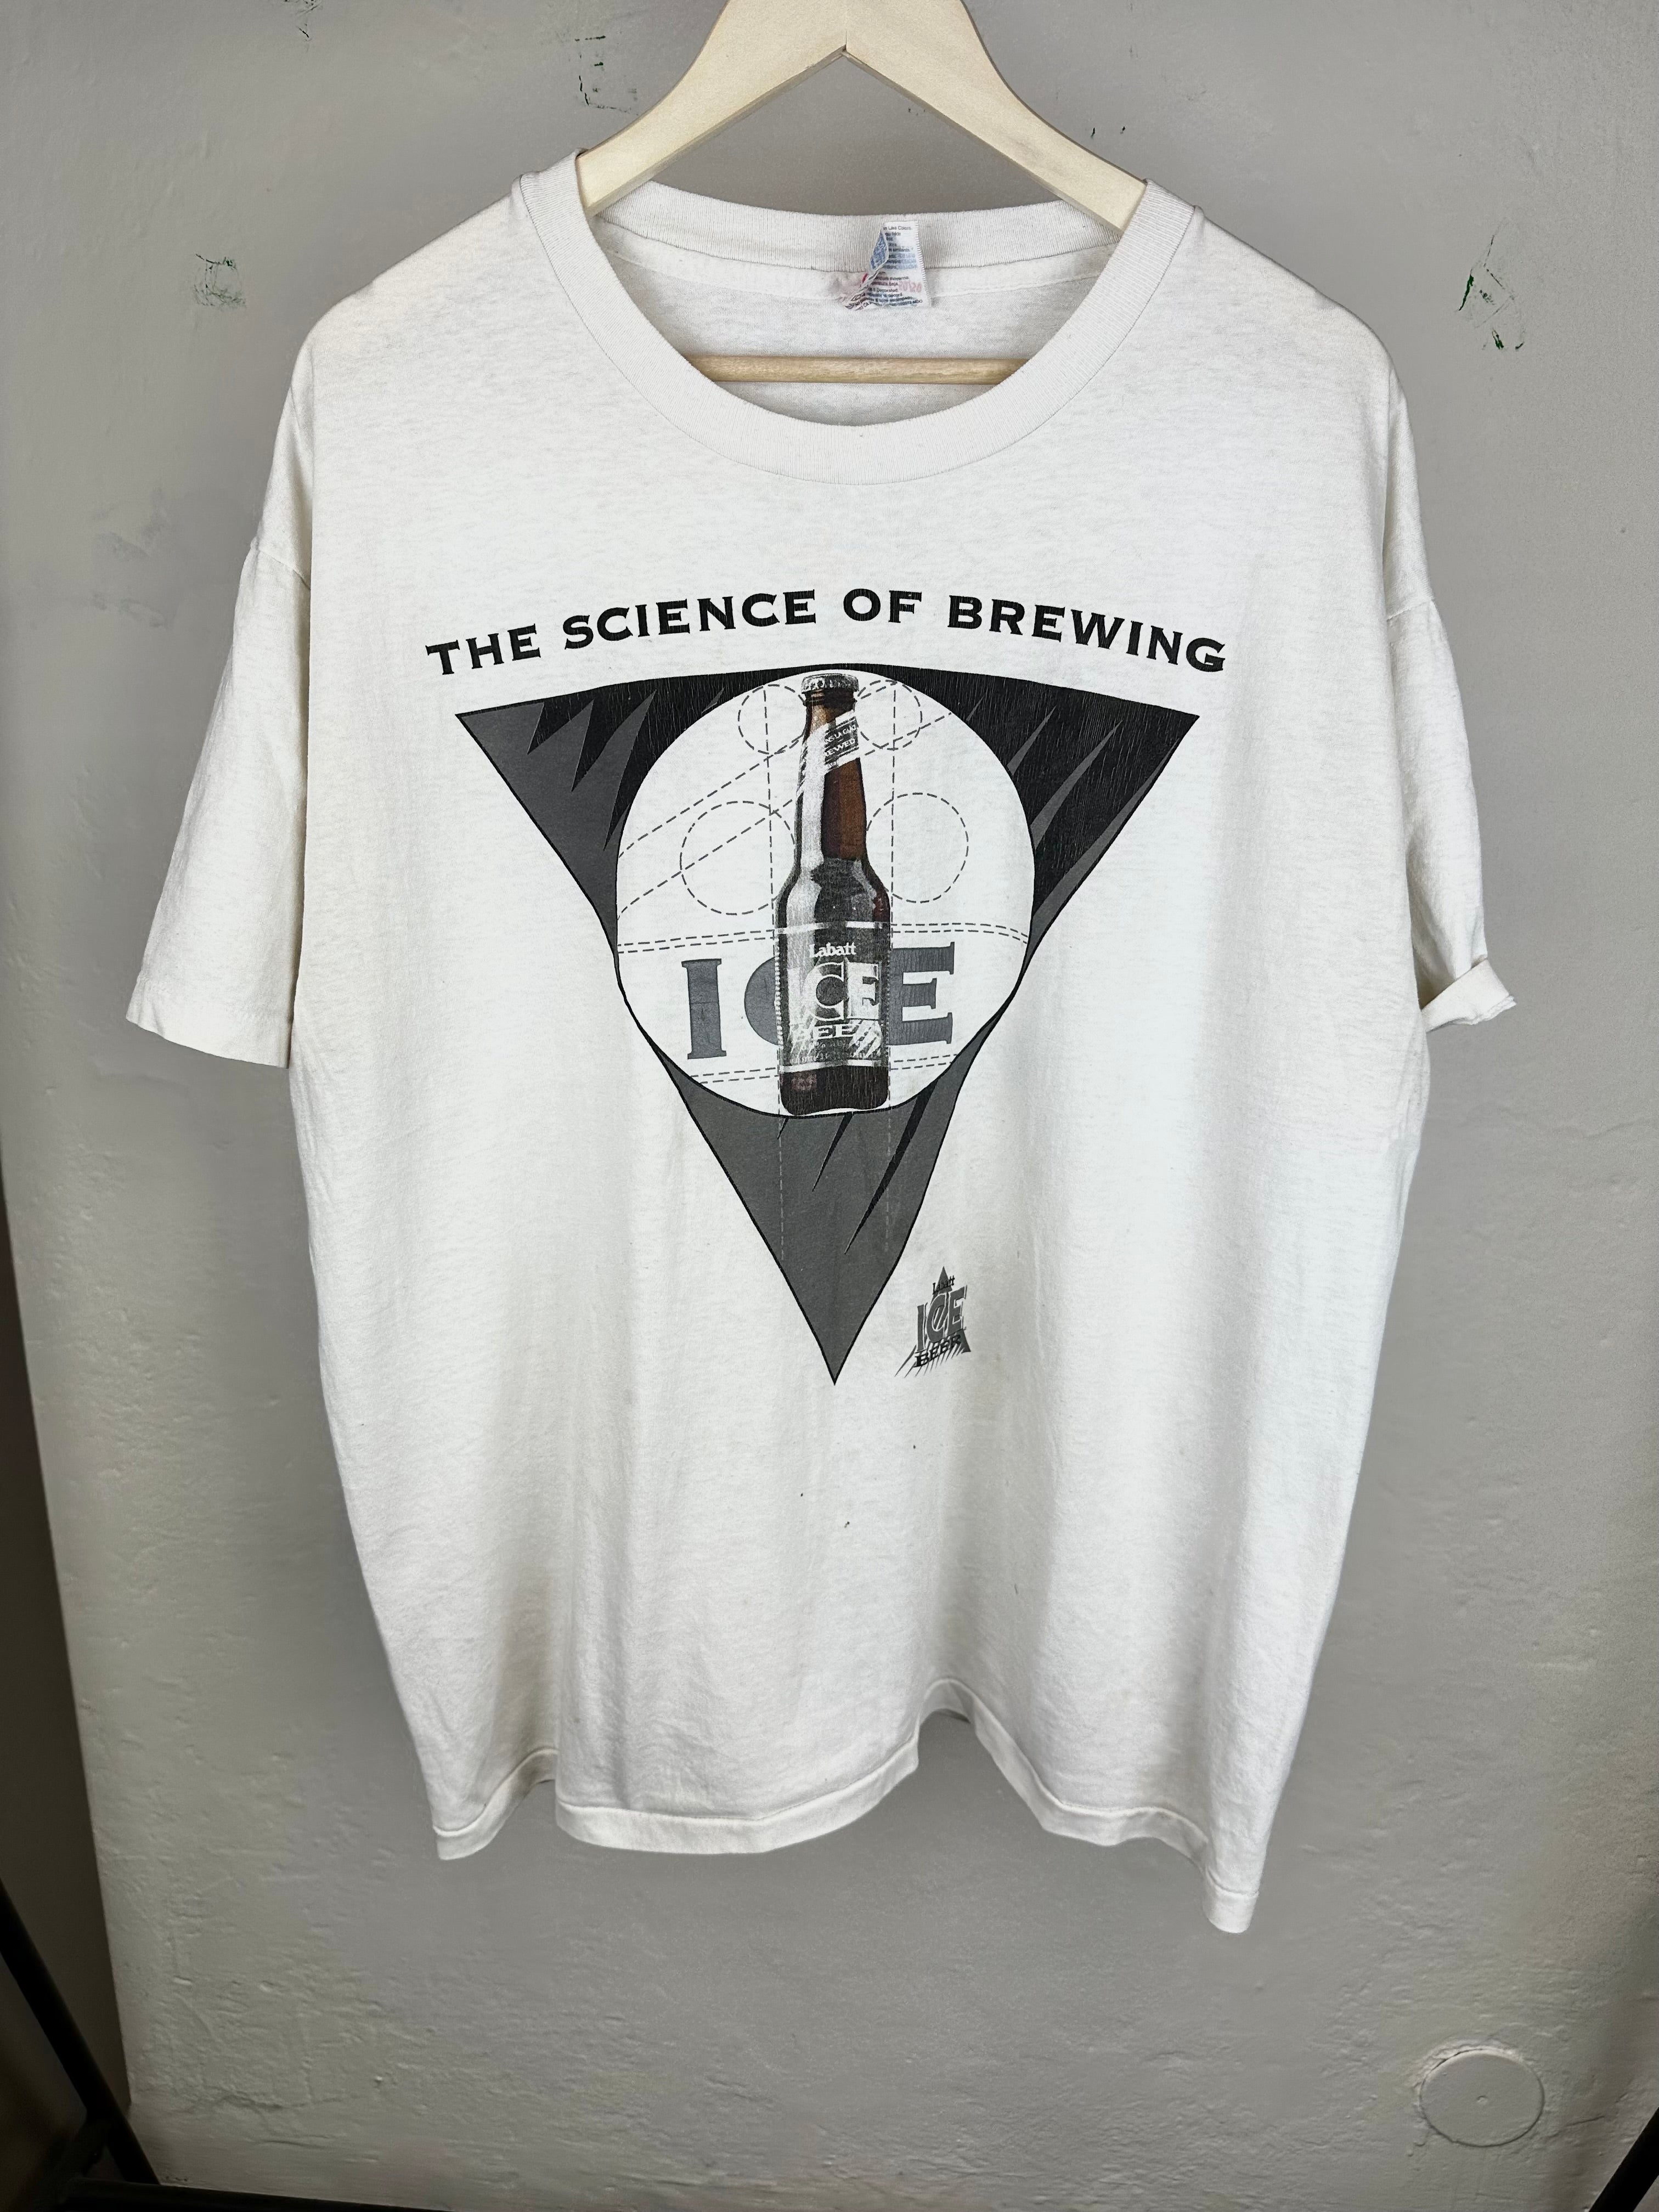 Vintage “Science of Brewing” 90s t-shirt - size XL